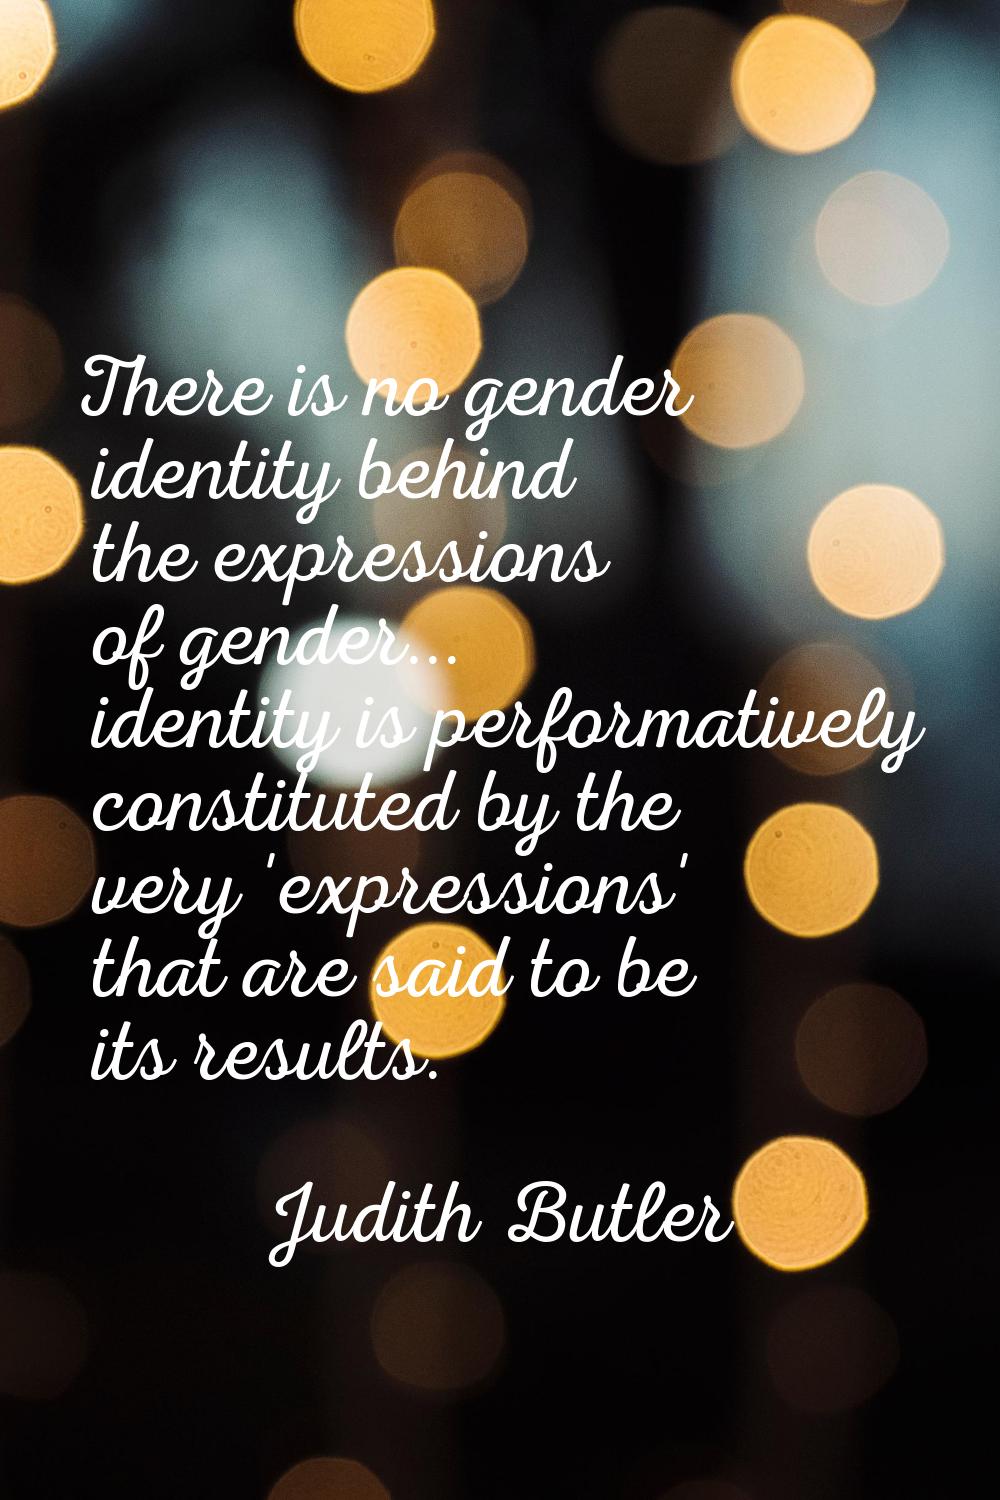 There is no gender identity behind the expressions of gender... identity is performatively constitu